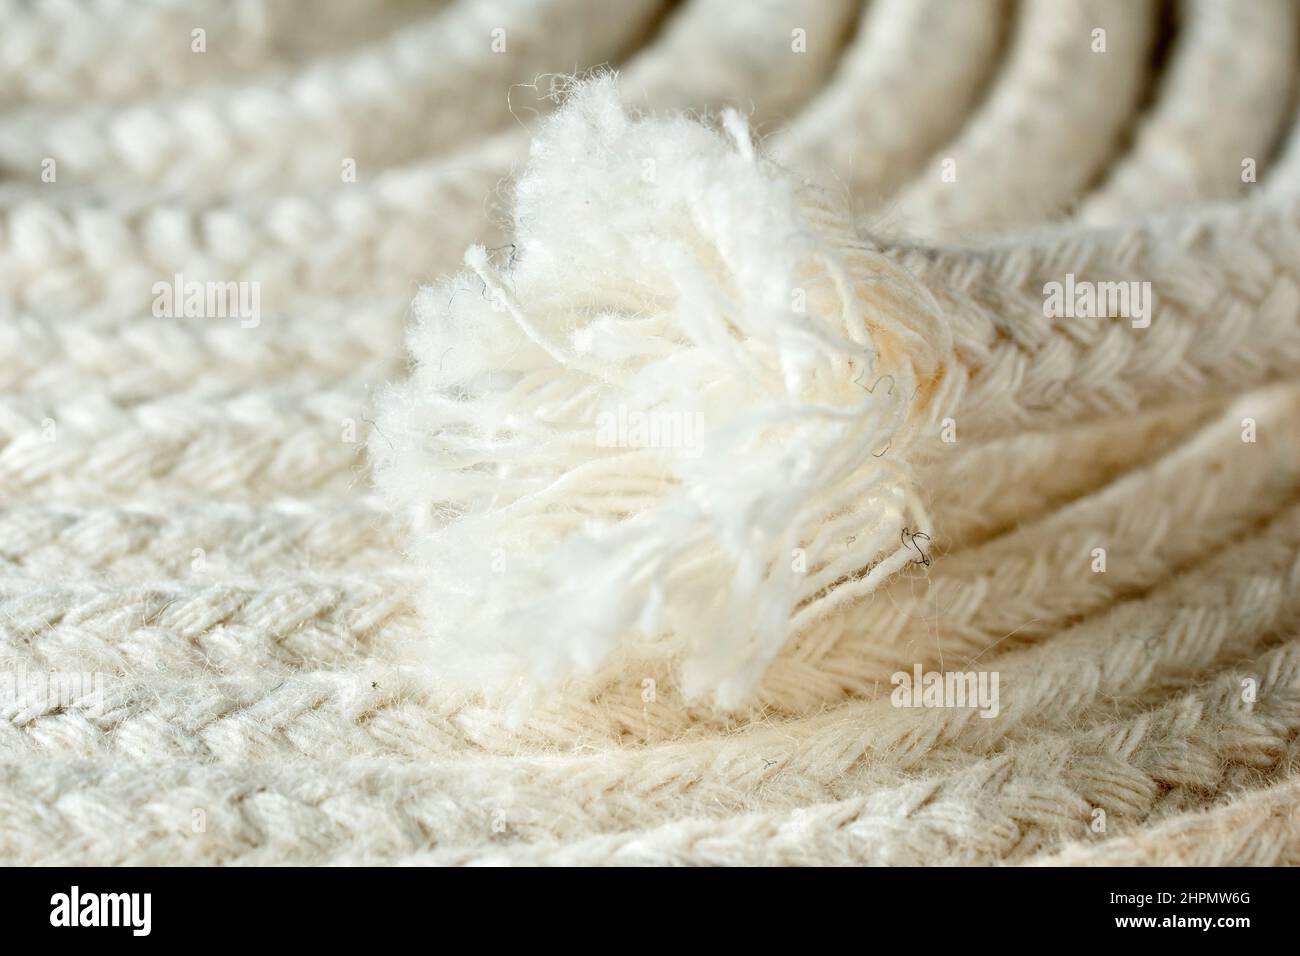 Close up of the frayed end of a thin white cotton rope commonly